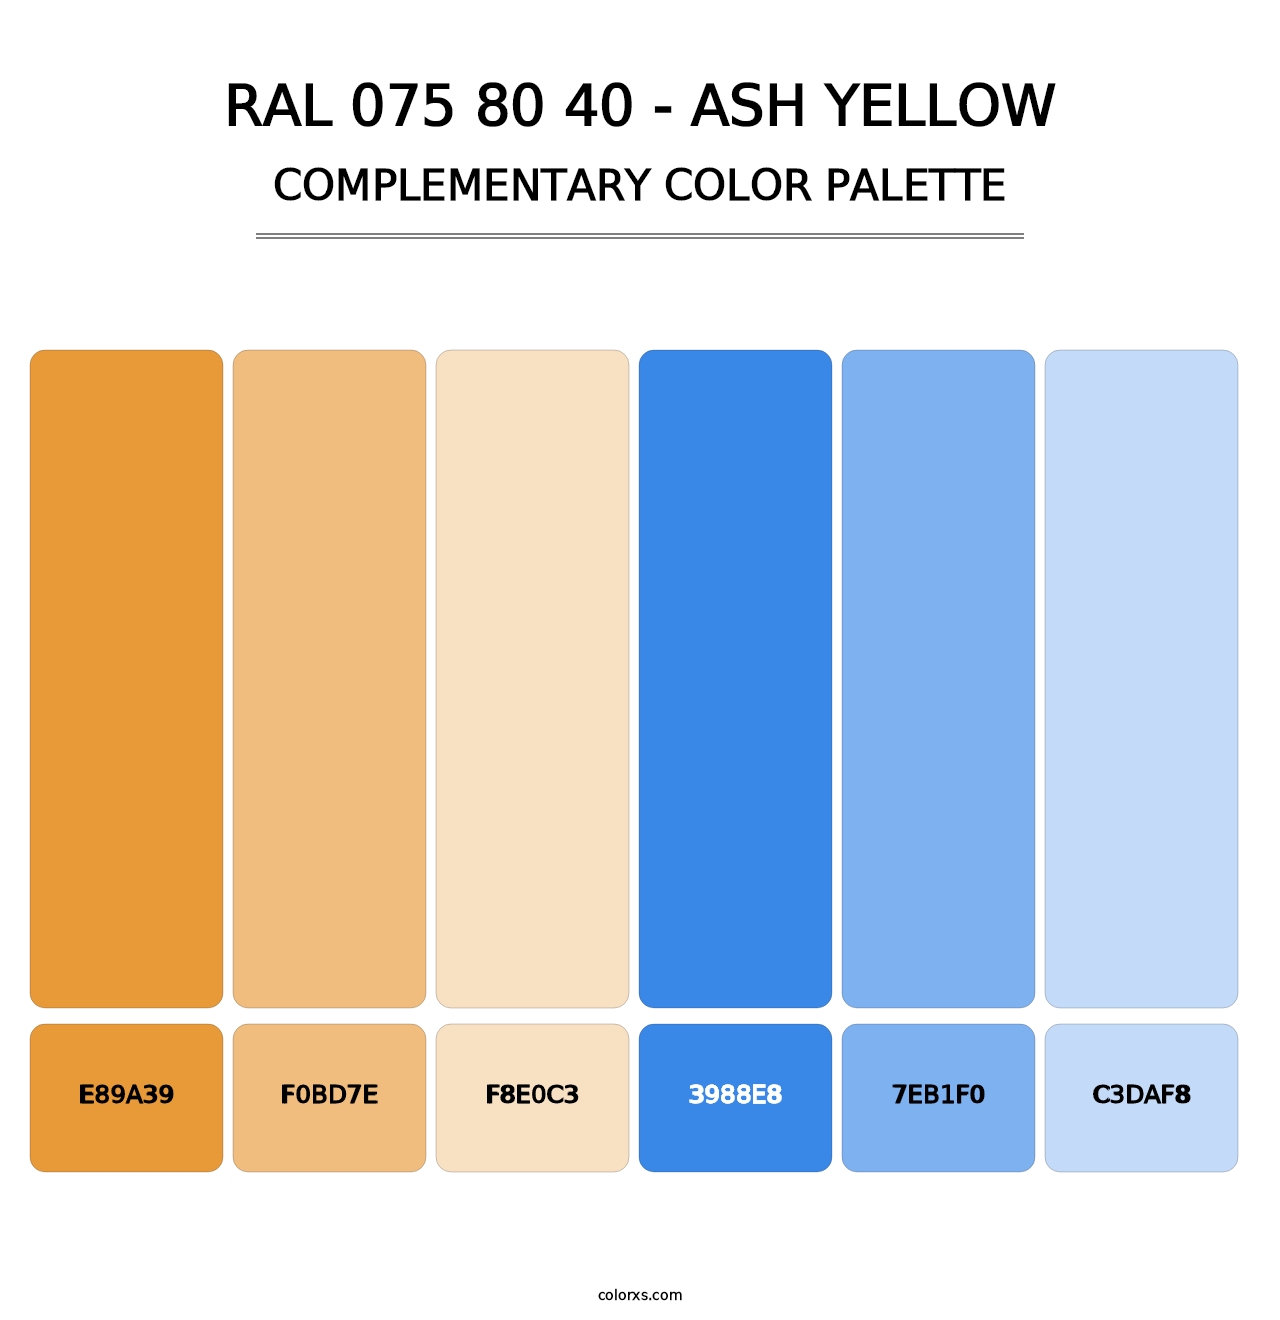 RAL 075 80 40 - Ash Yellow - Complementary Color Palette